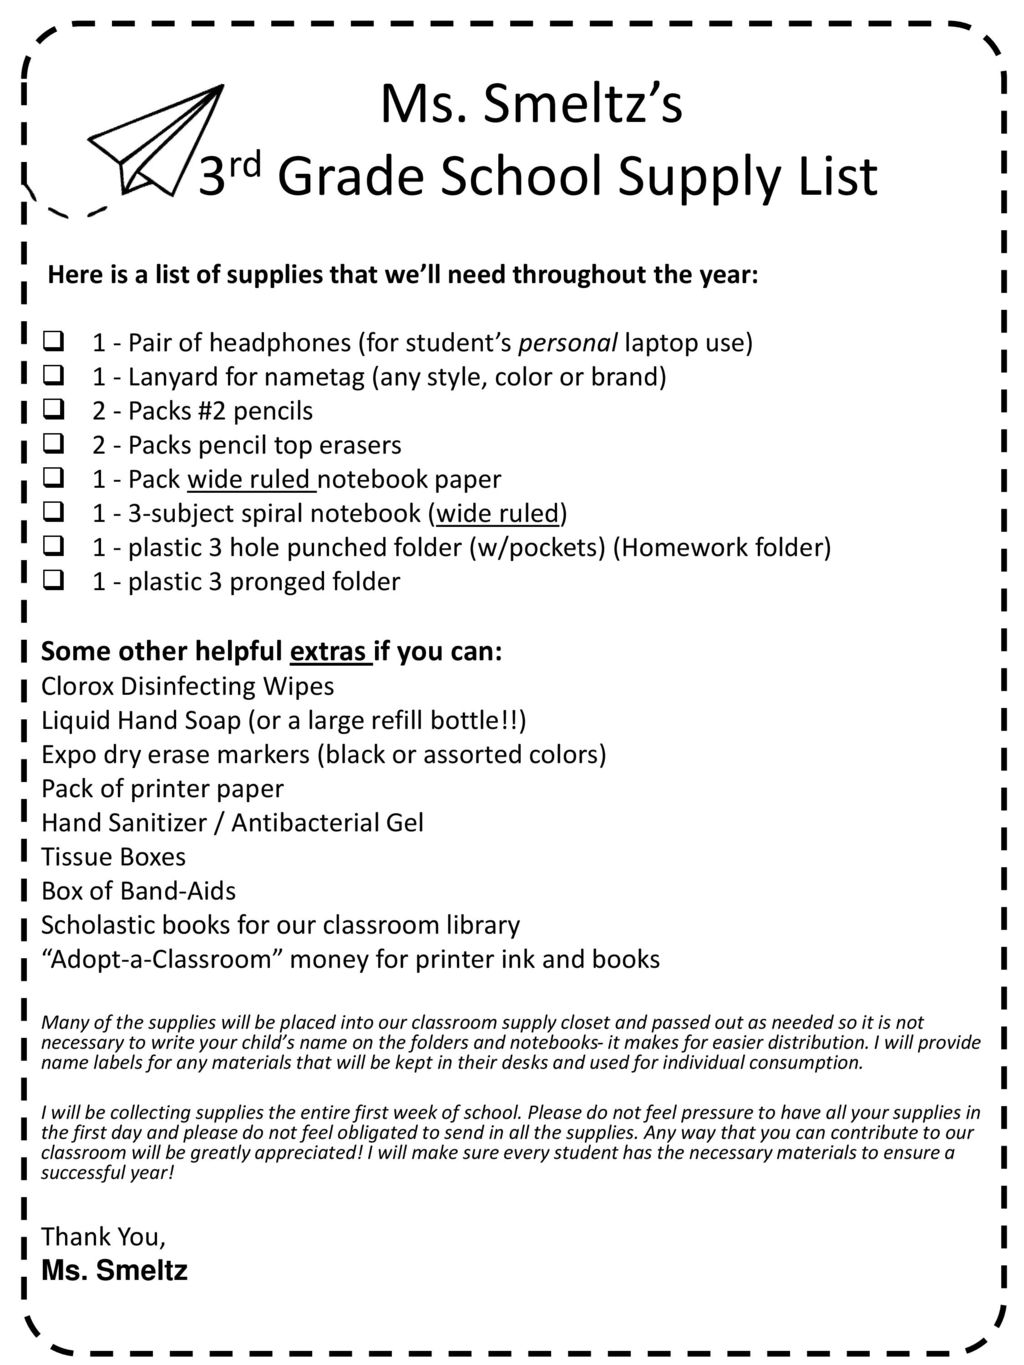 School Supply Labels for How to Use School Supplies Class